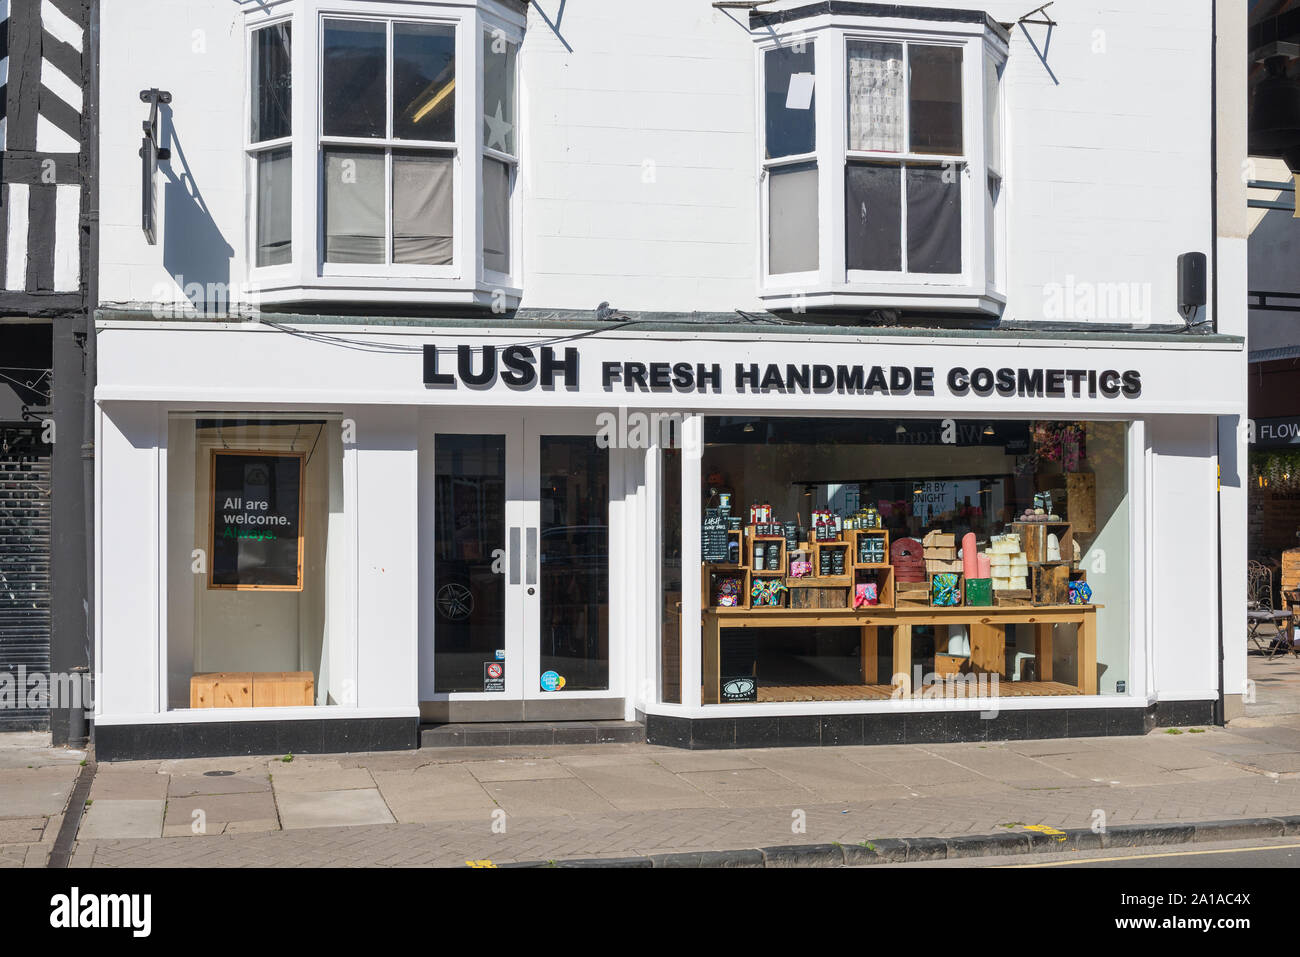 Toulouse, Occitanie France - 06 16 2021: Lush Fresh Handmade Cosmetics Logo  Sign And Text Brand Front Of Store Of Beauty Products Stock Photo, Picture  and Royalty Free Image. Image 170600834.